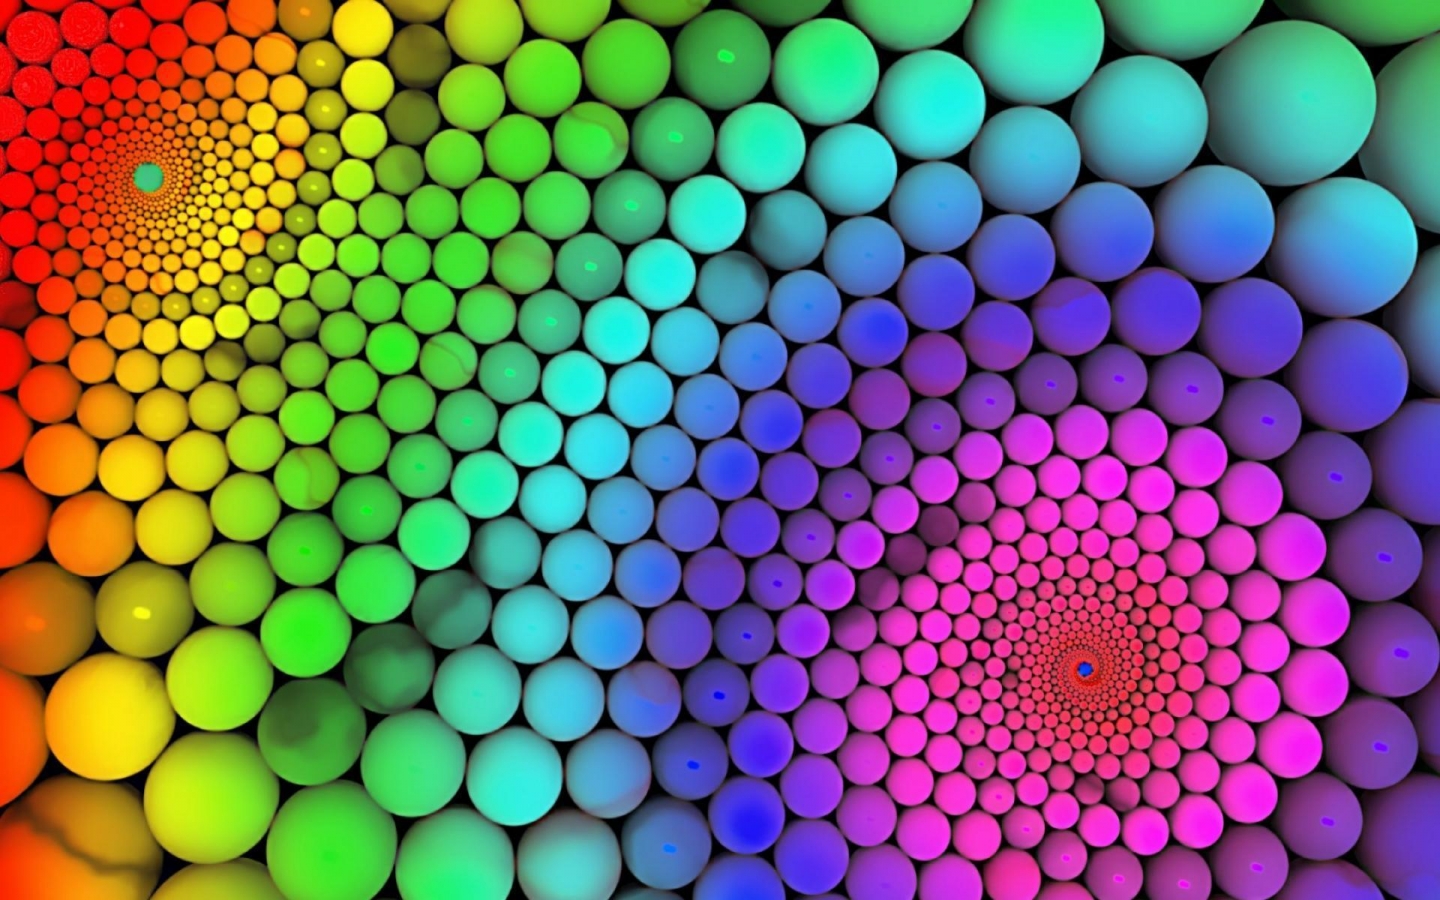 Colourful Balls for 1440 x 900 widescreen resolution